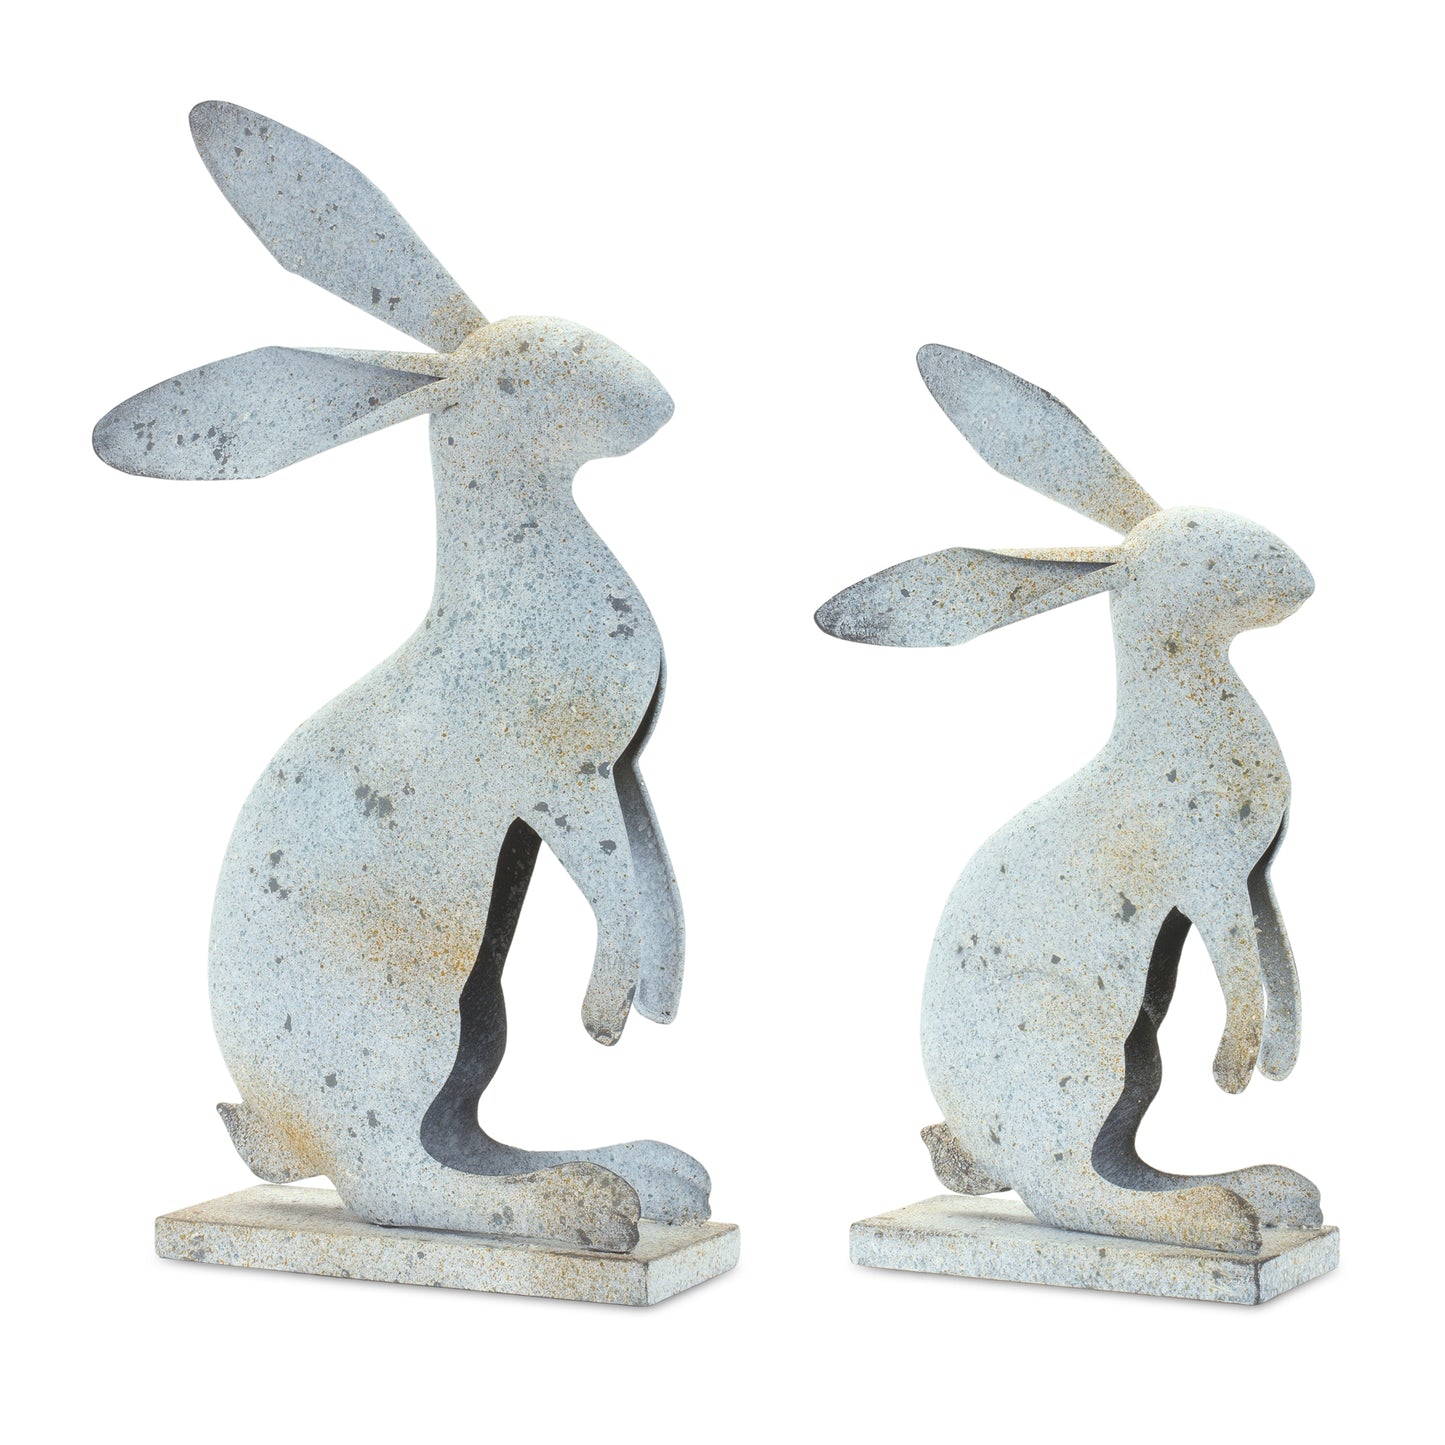 Weathered Iron Standing Rabbit Décor with Distressed Finish (Set of 2)